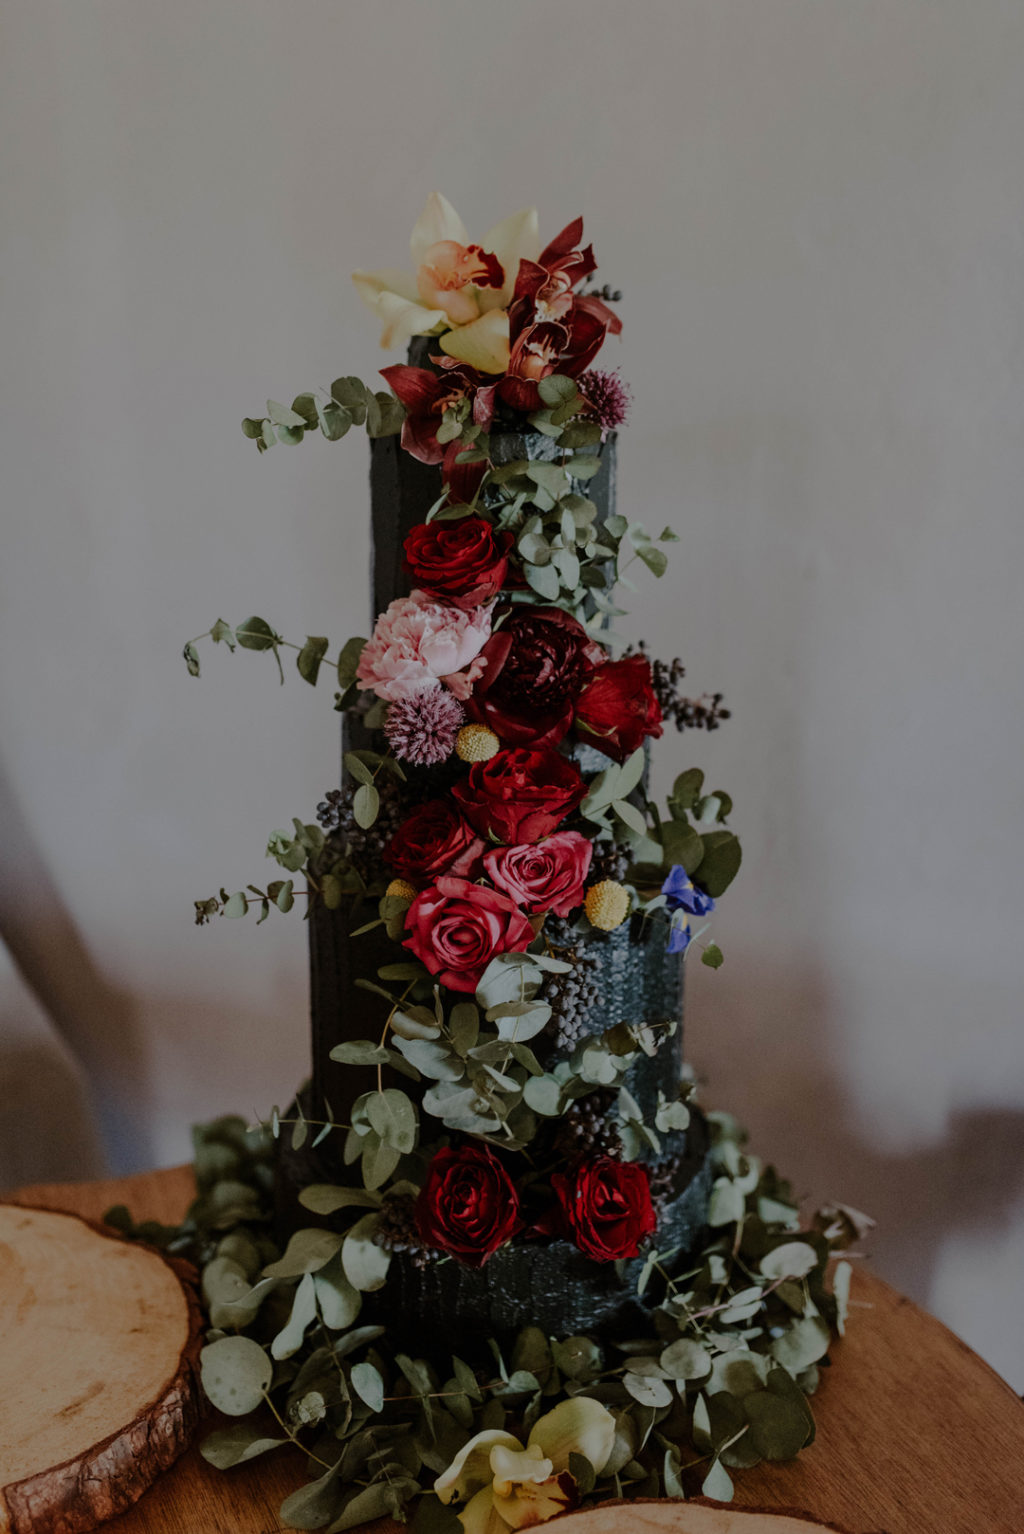 A textural black wedding cake with lush and bright florals was create by the bride